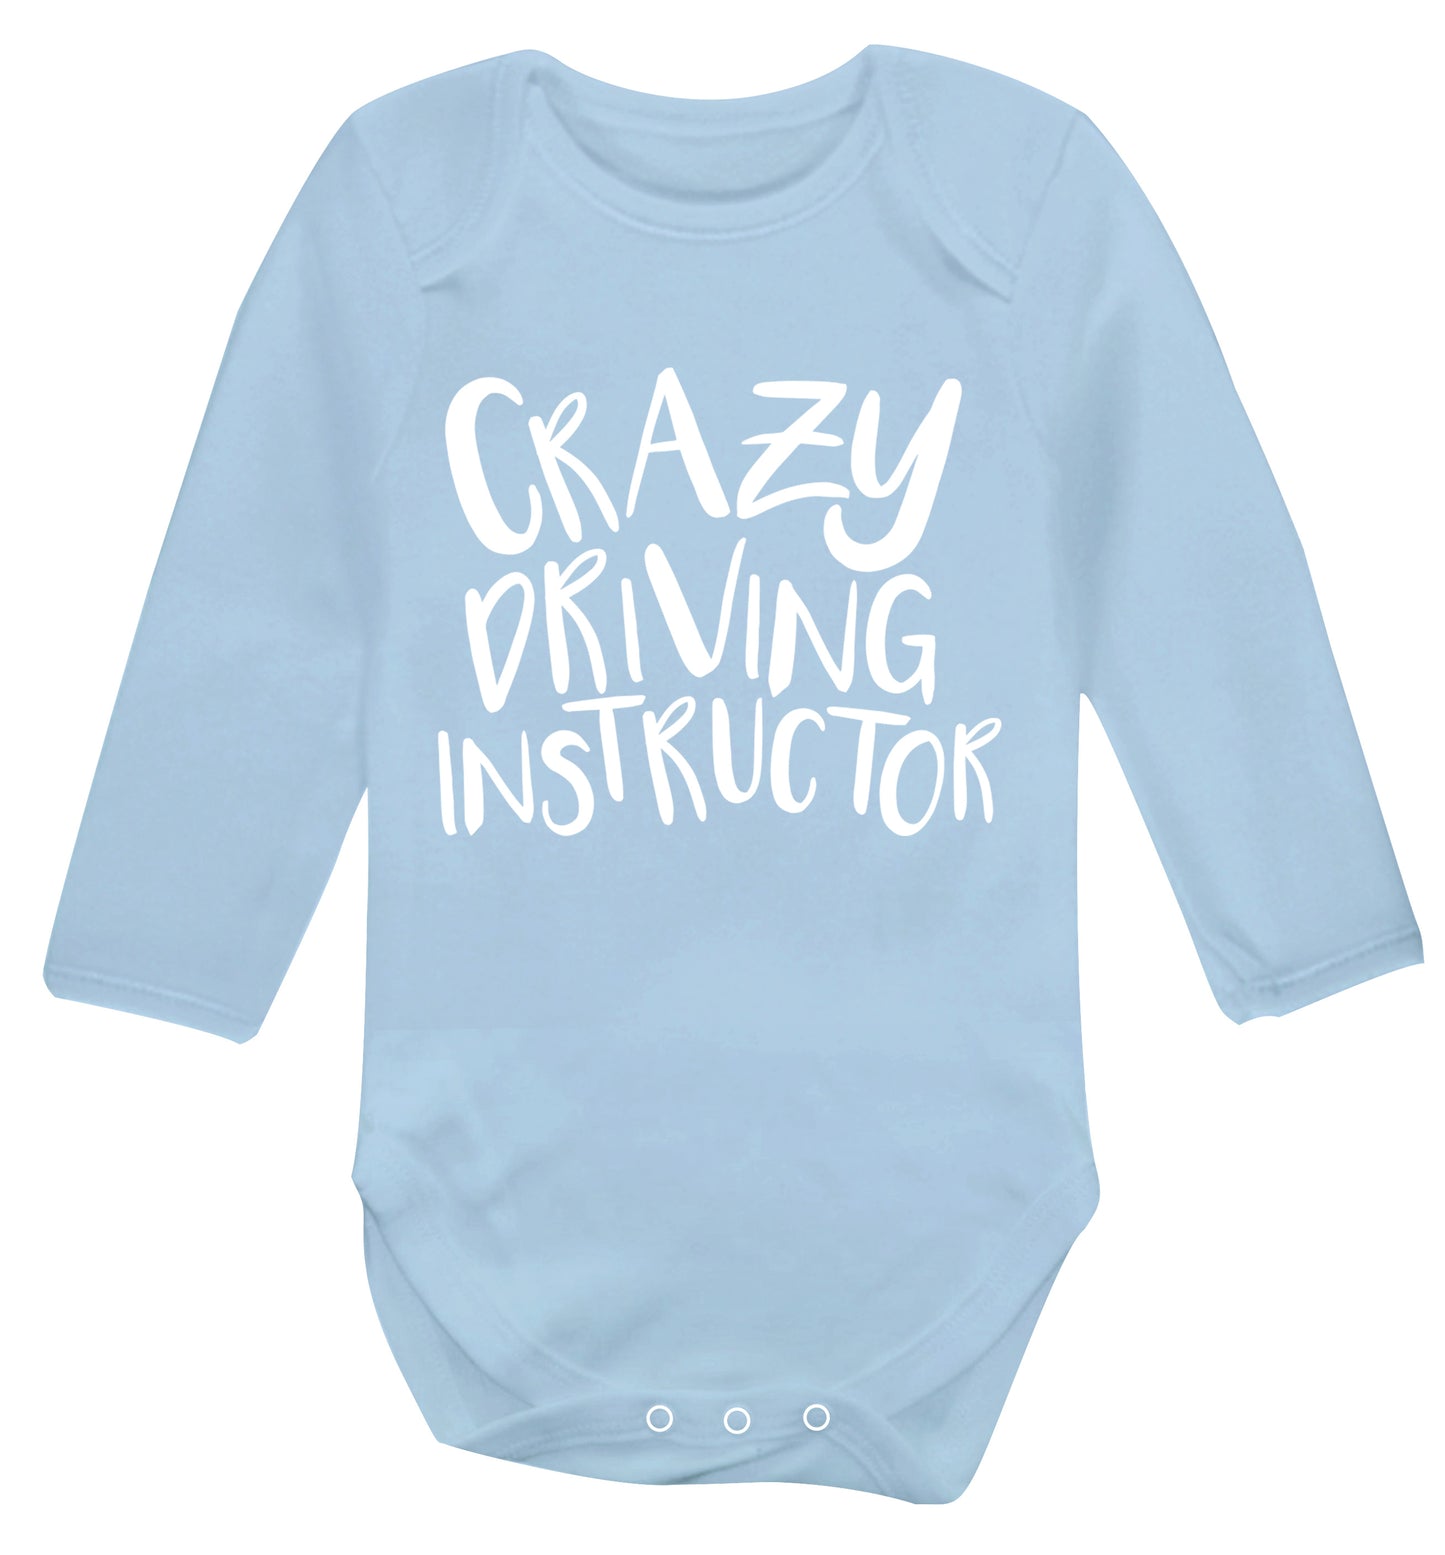 Crazy driving instructor Baby Vest long sleeved pale blue 6-12 months